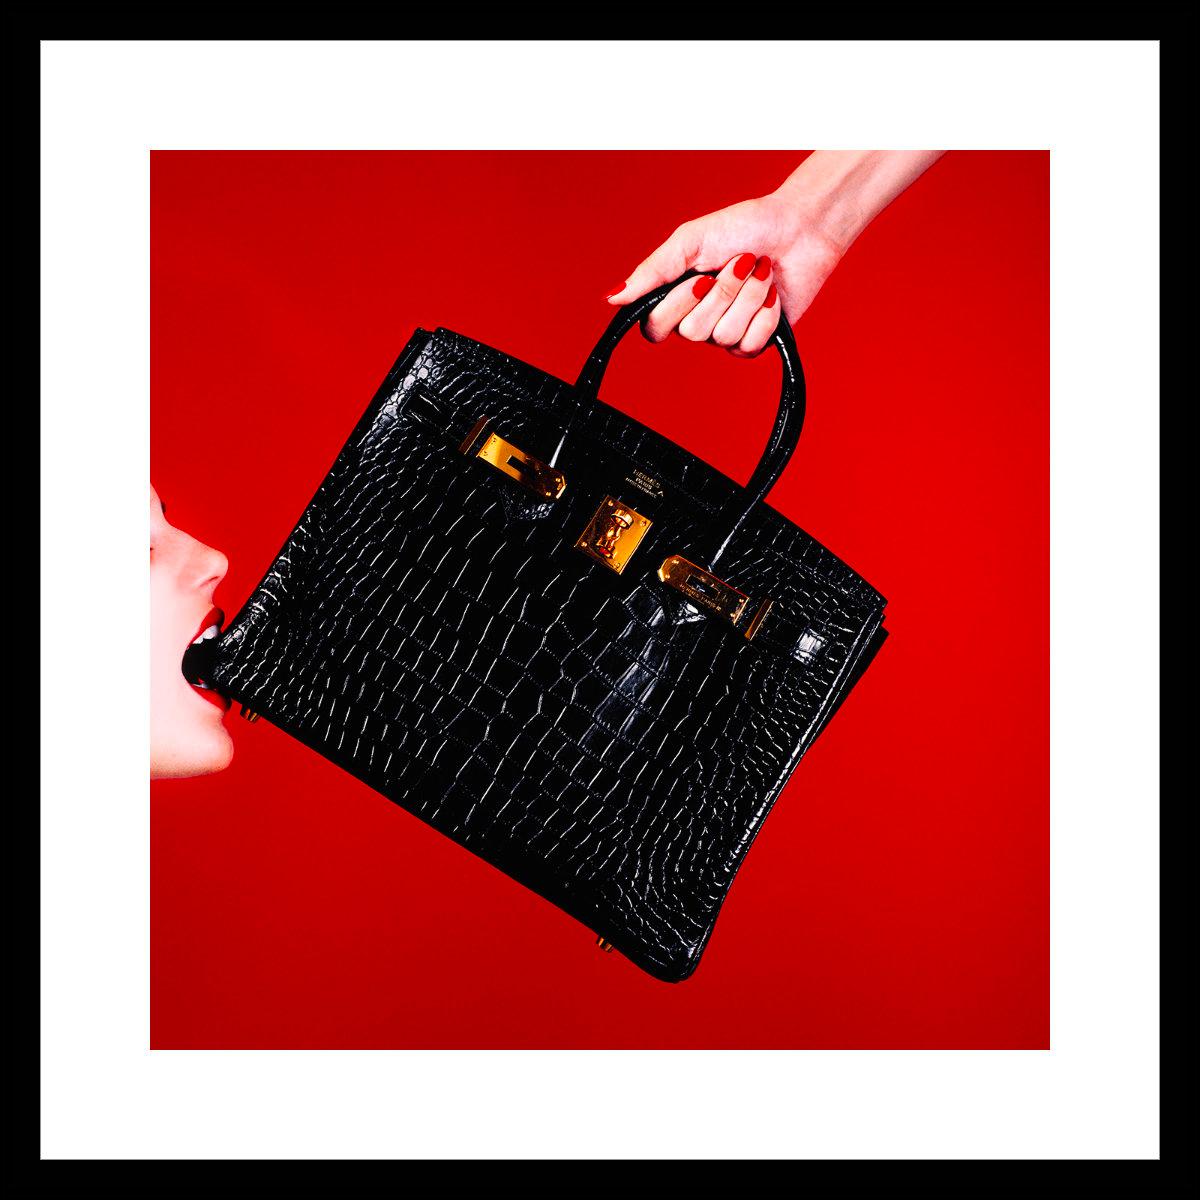 Tyler Shields - Black Birkin, Photography 2021, Printed After For Sale 1